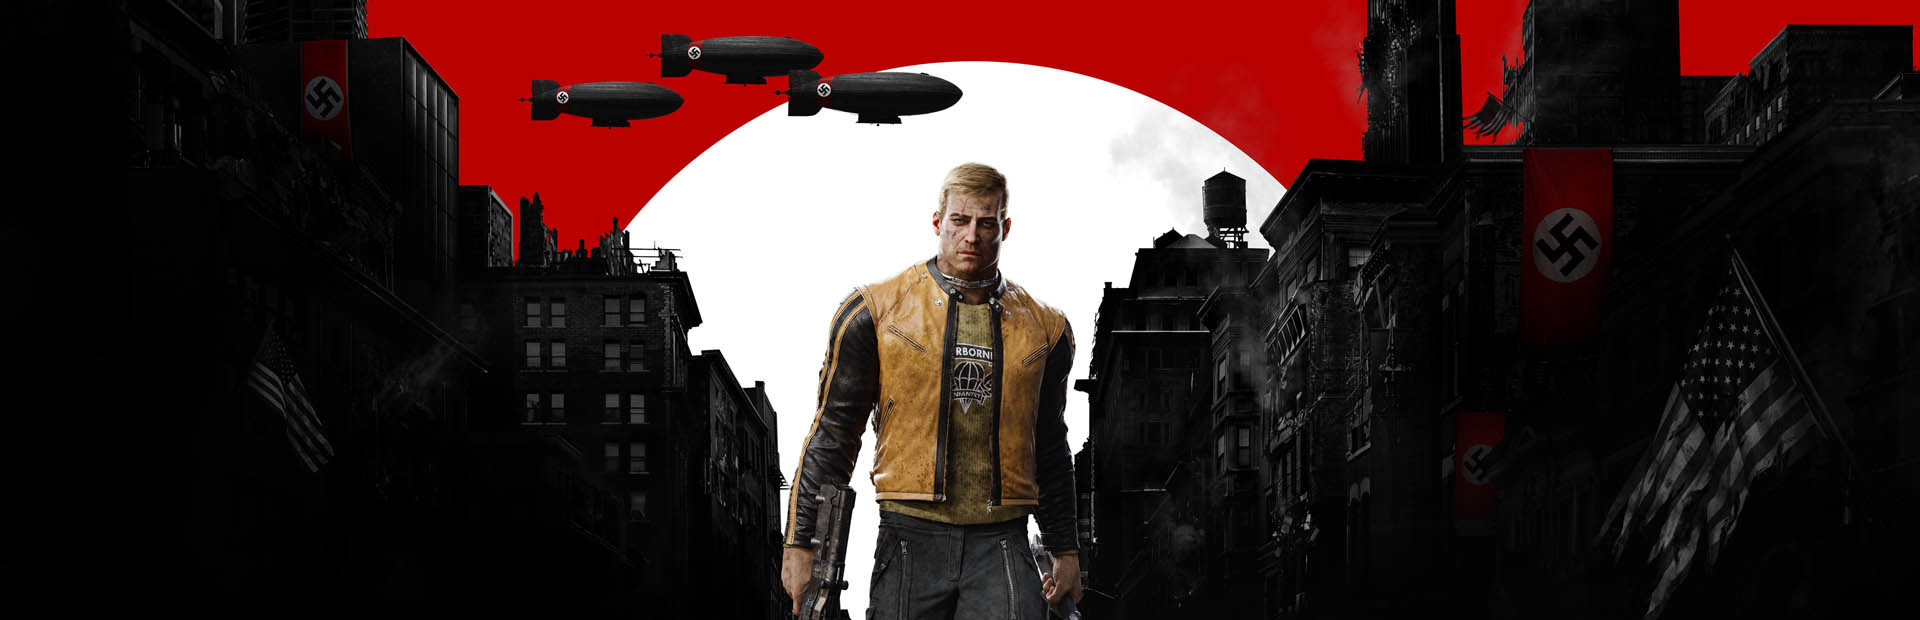 Wolfenstein II: The New Colossus cover image